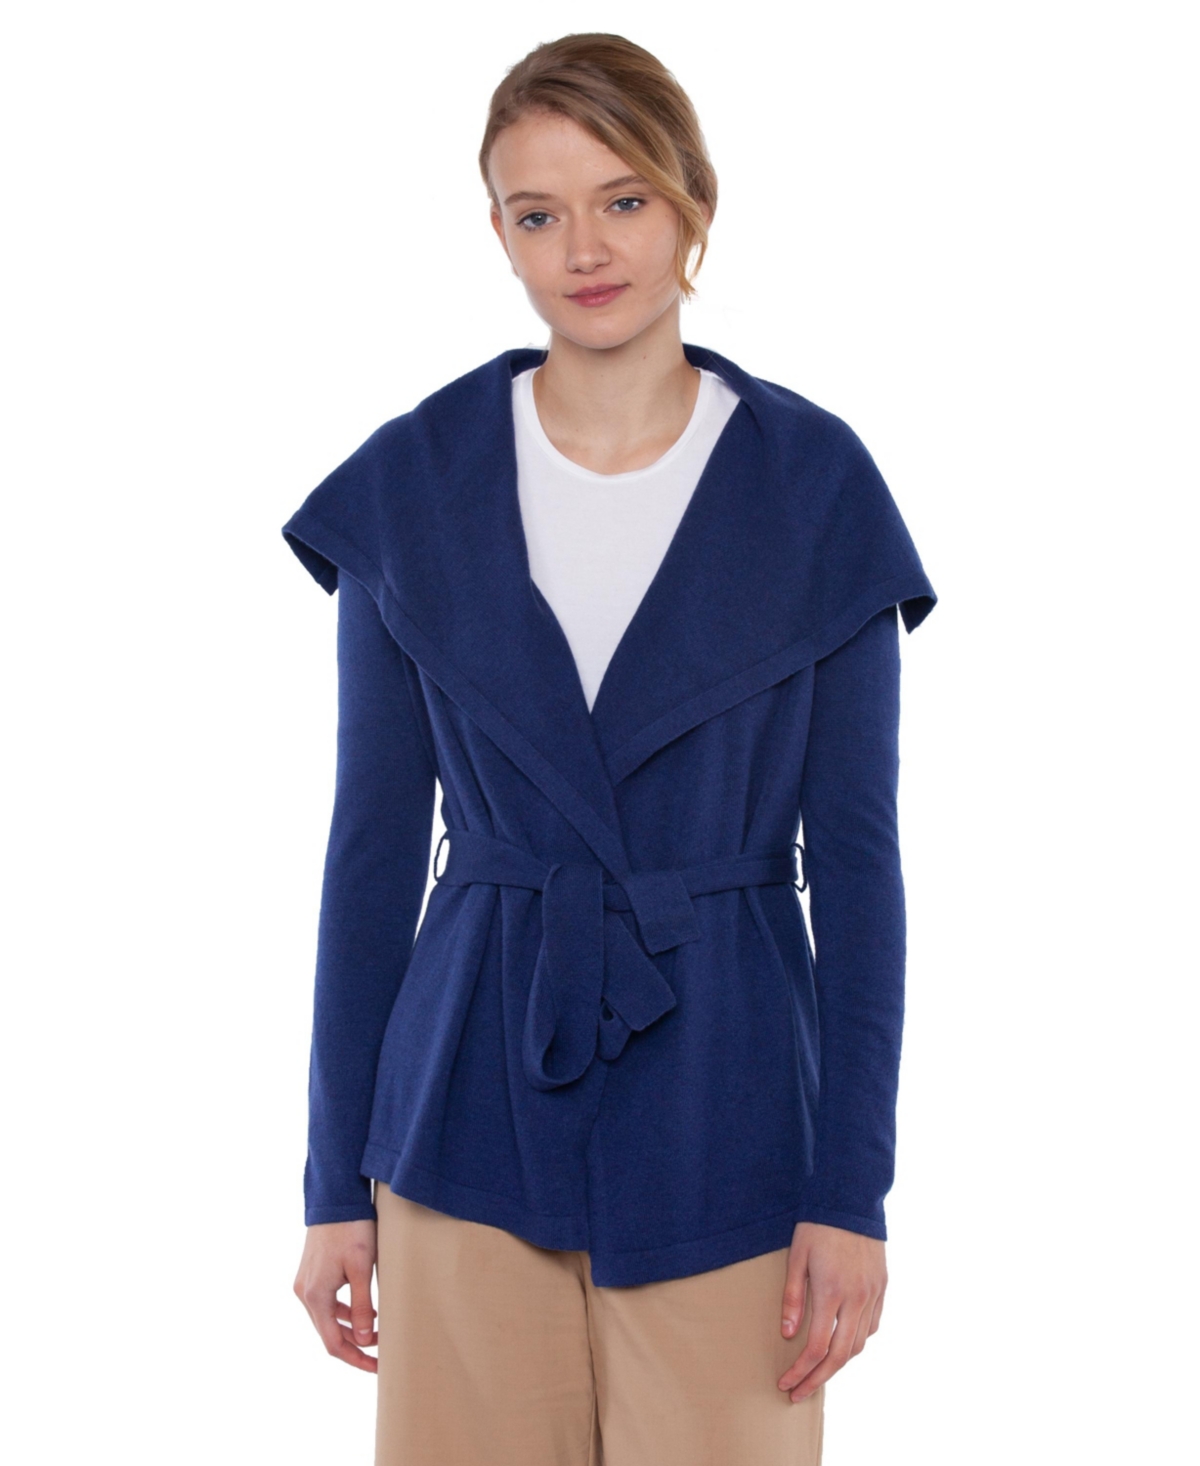 Women's 100% Pure Cashmere Long Sleeve Belted Cardigan Sweater - Marled blue